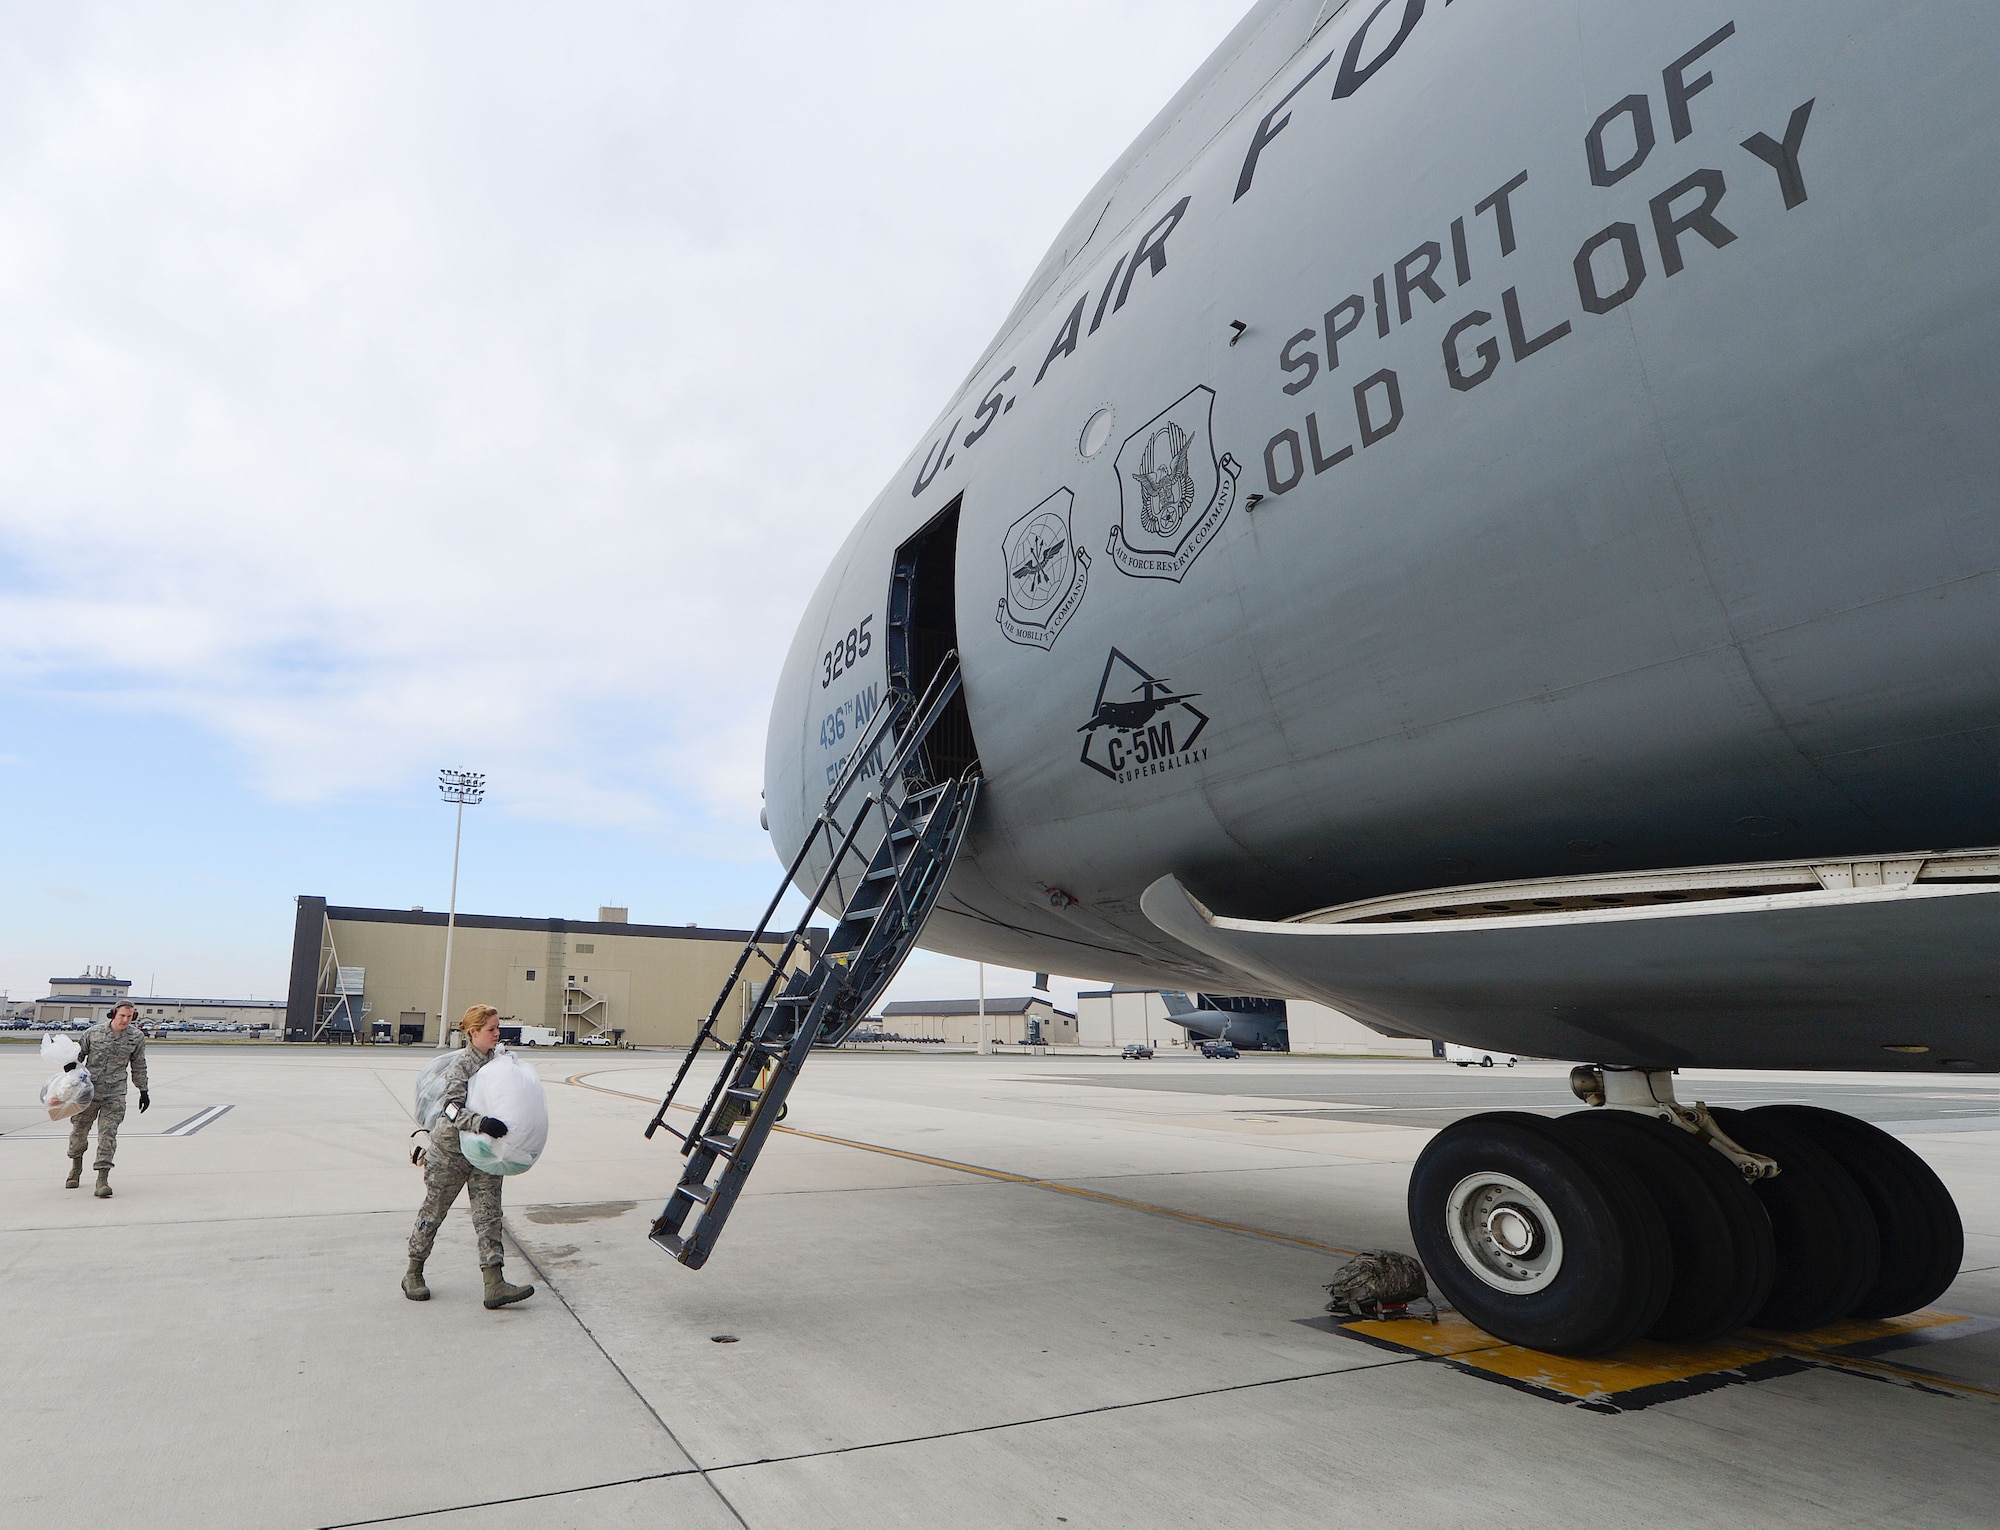 Clean fleet servicing is usually done hours before a cargo mission is ready to go. Here, airmen from the 436th Aerial Port Squadron, clean fleet section, move consumable items from their transport van to the C-5M Super Galaxy aircraft from the 436th Airlift Wing, Dover Air Force Base, Del. The 436th Aerial Port Squadron, clean fleet services section, works out of the passenger terminal and is shown in-action March 28, 2013. (U.S. Air Force photo/Greg L. Davis)